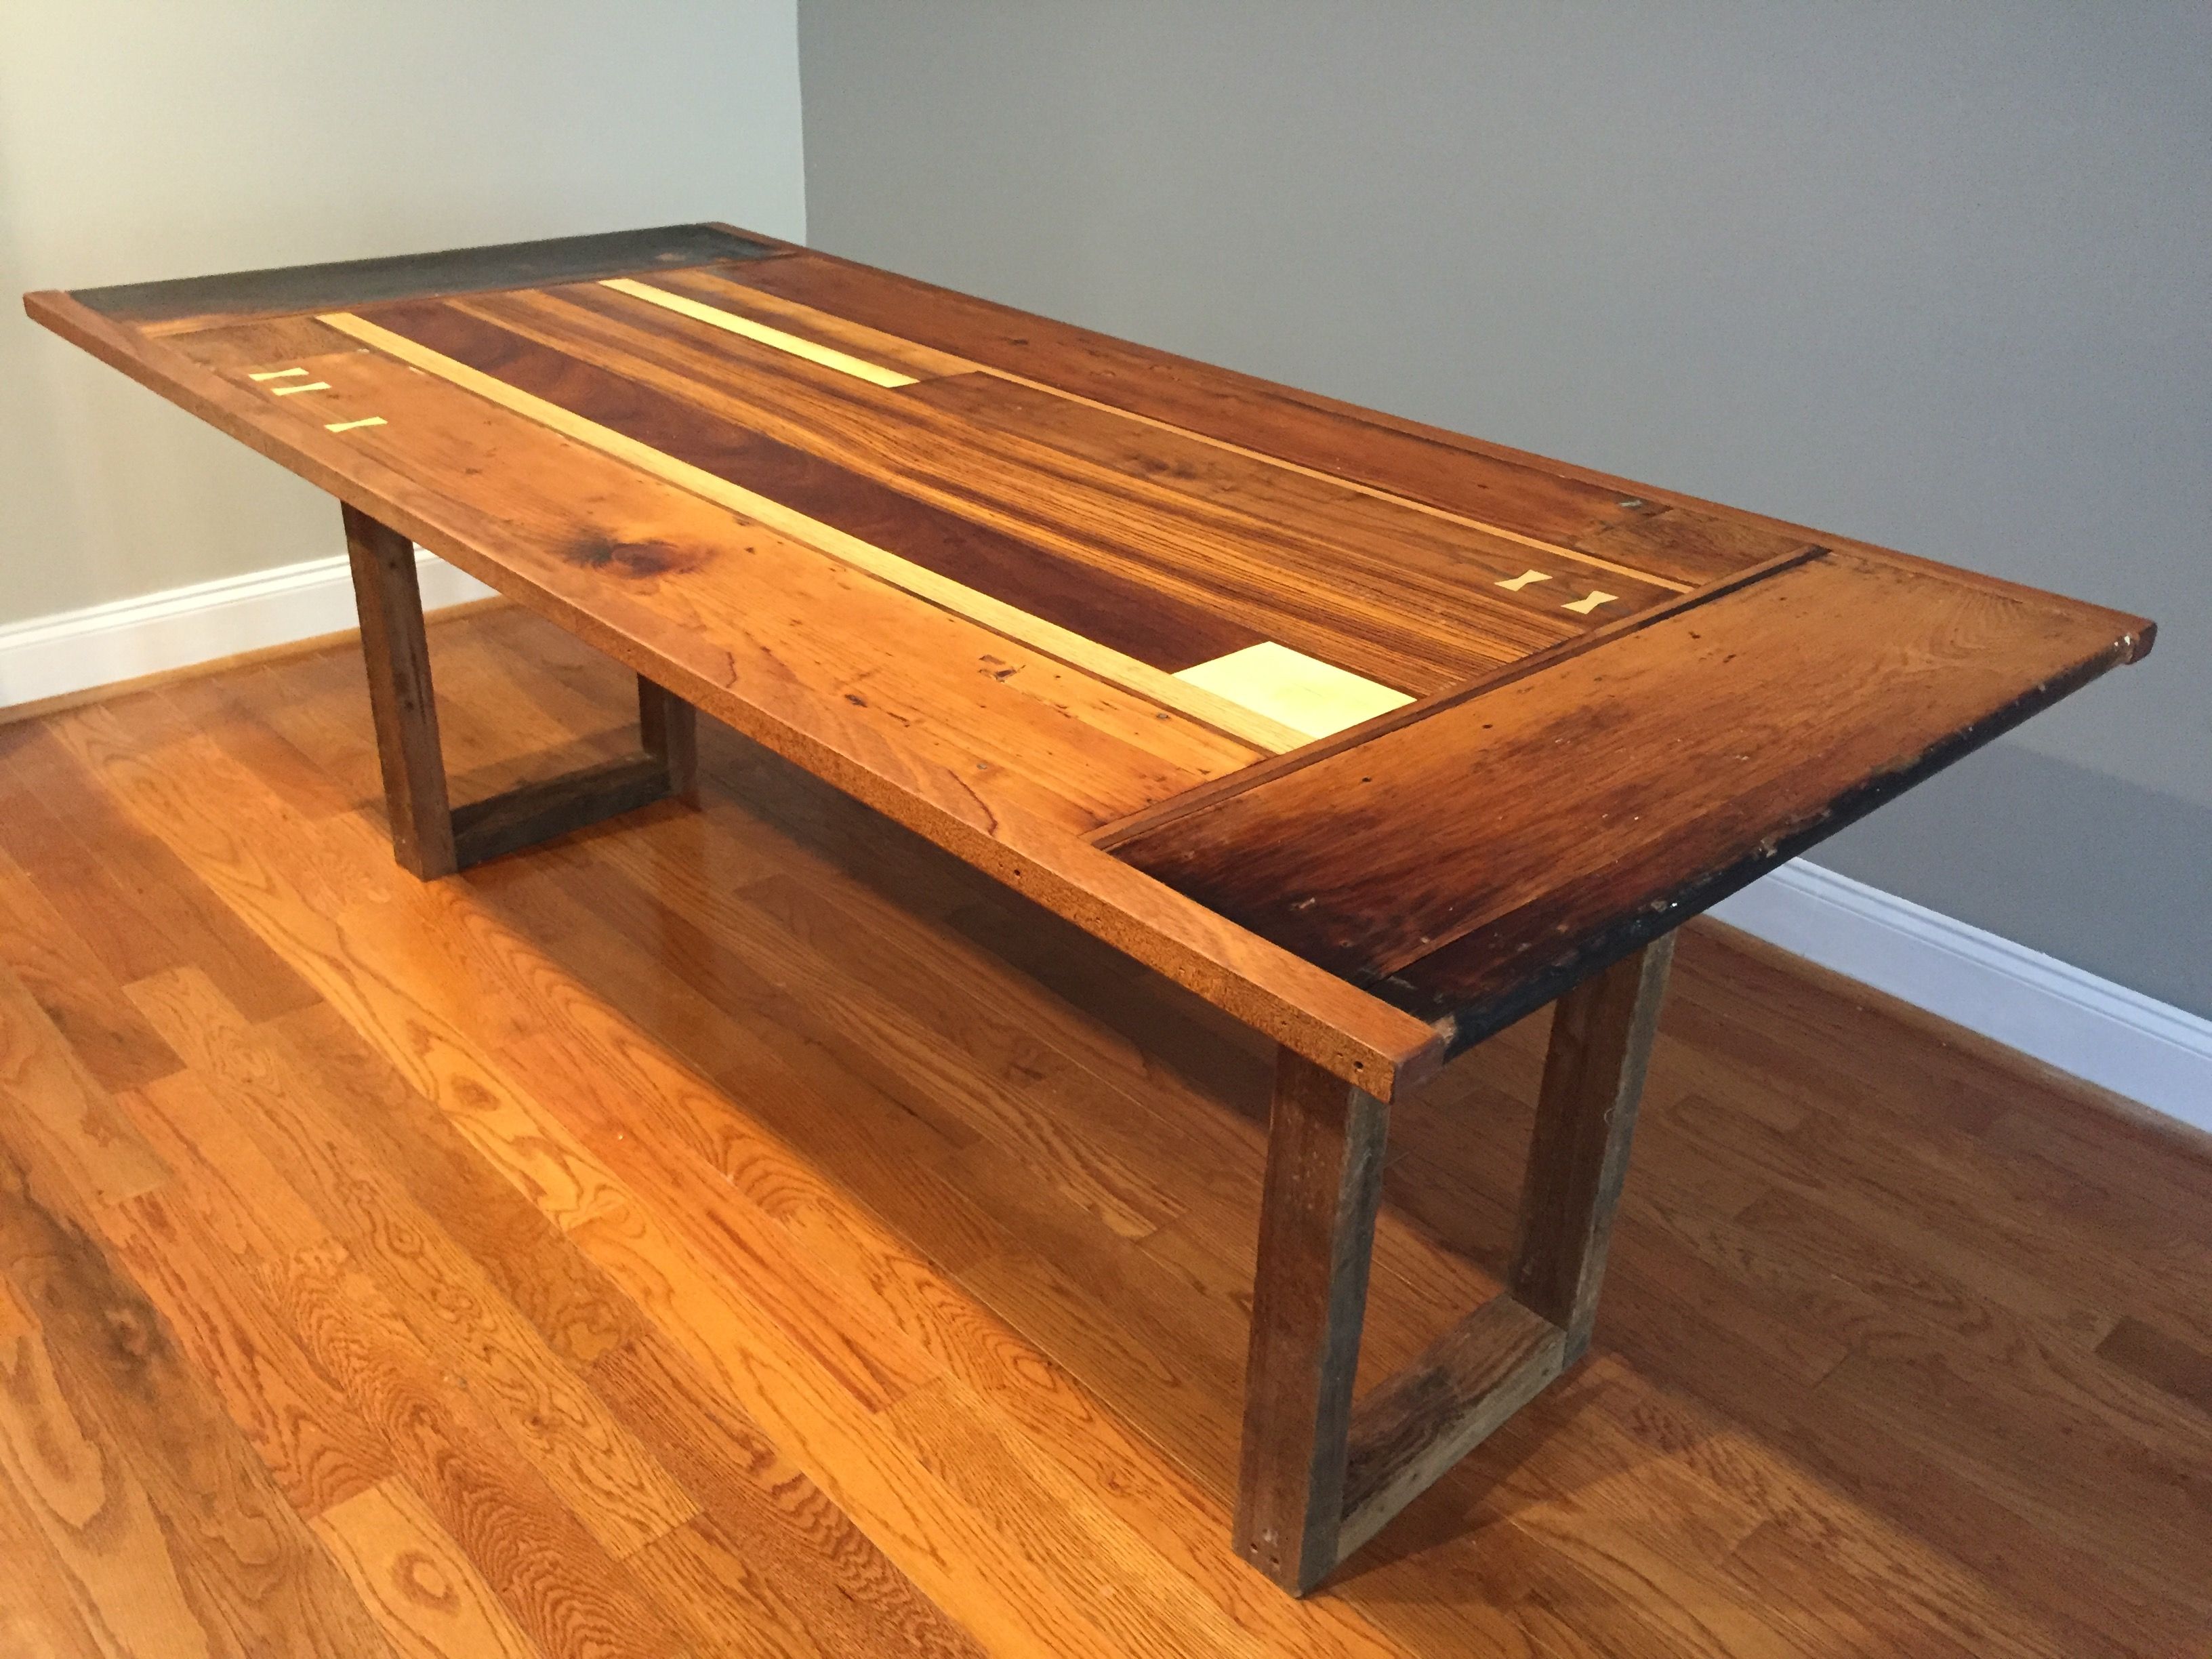 Reclaimed Wood Dining Table